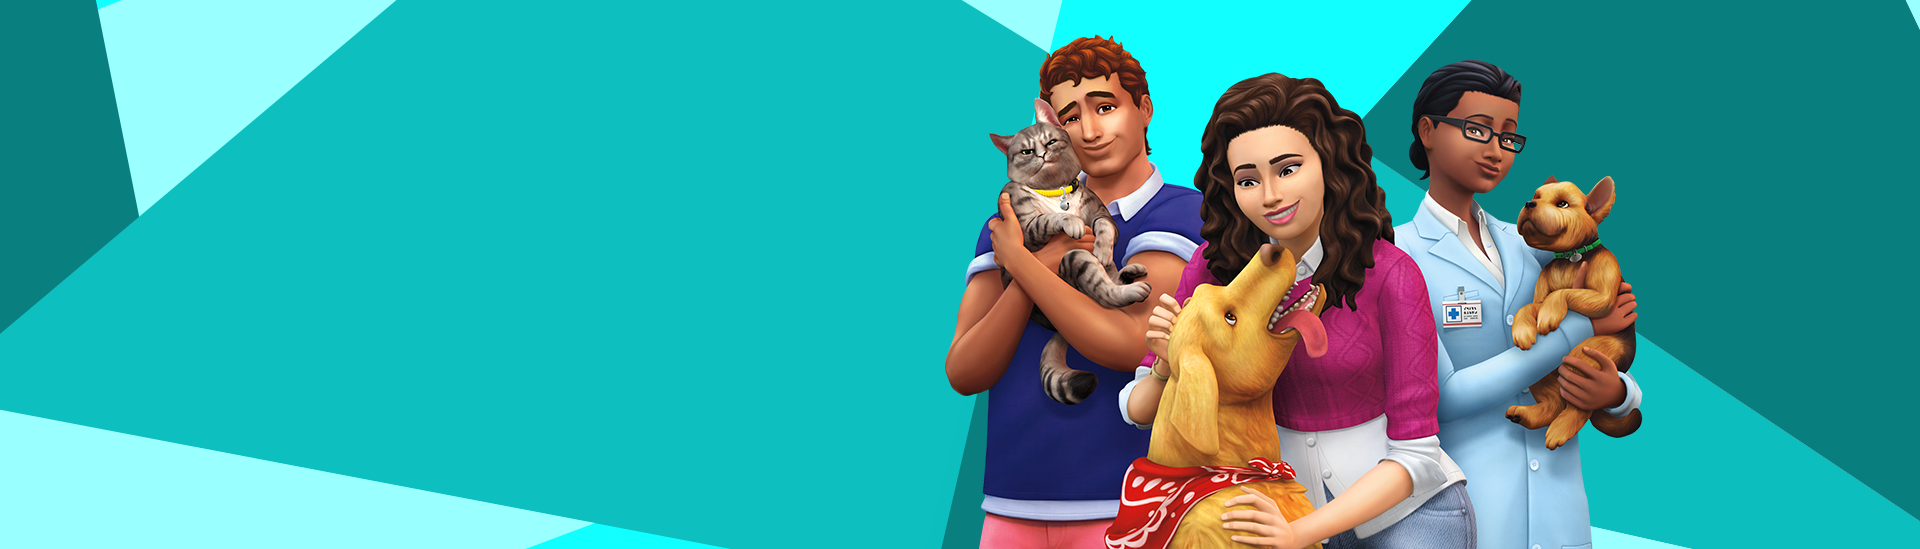 the sims 4 cats and dogs system requirements